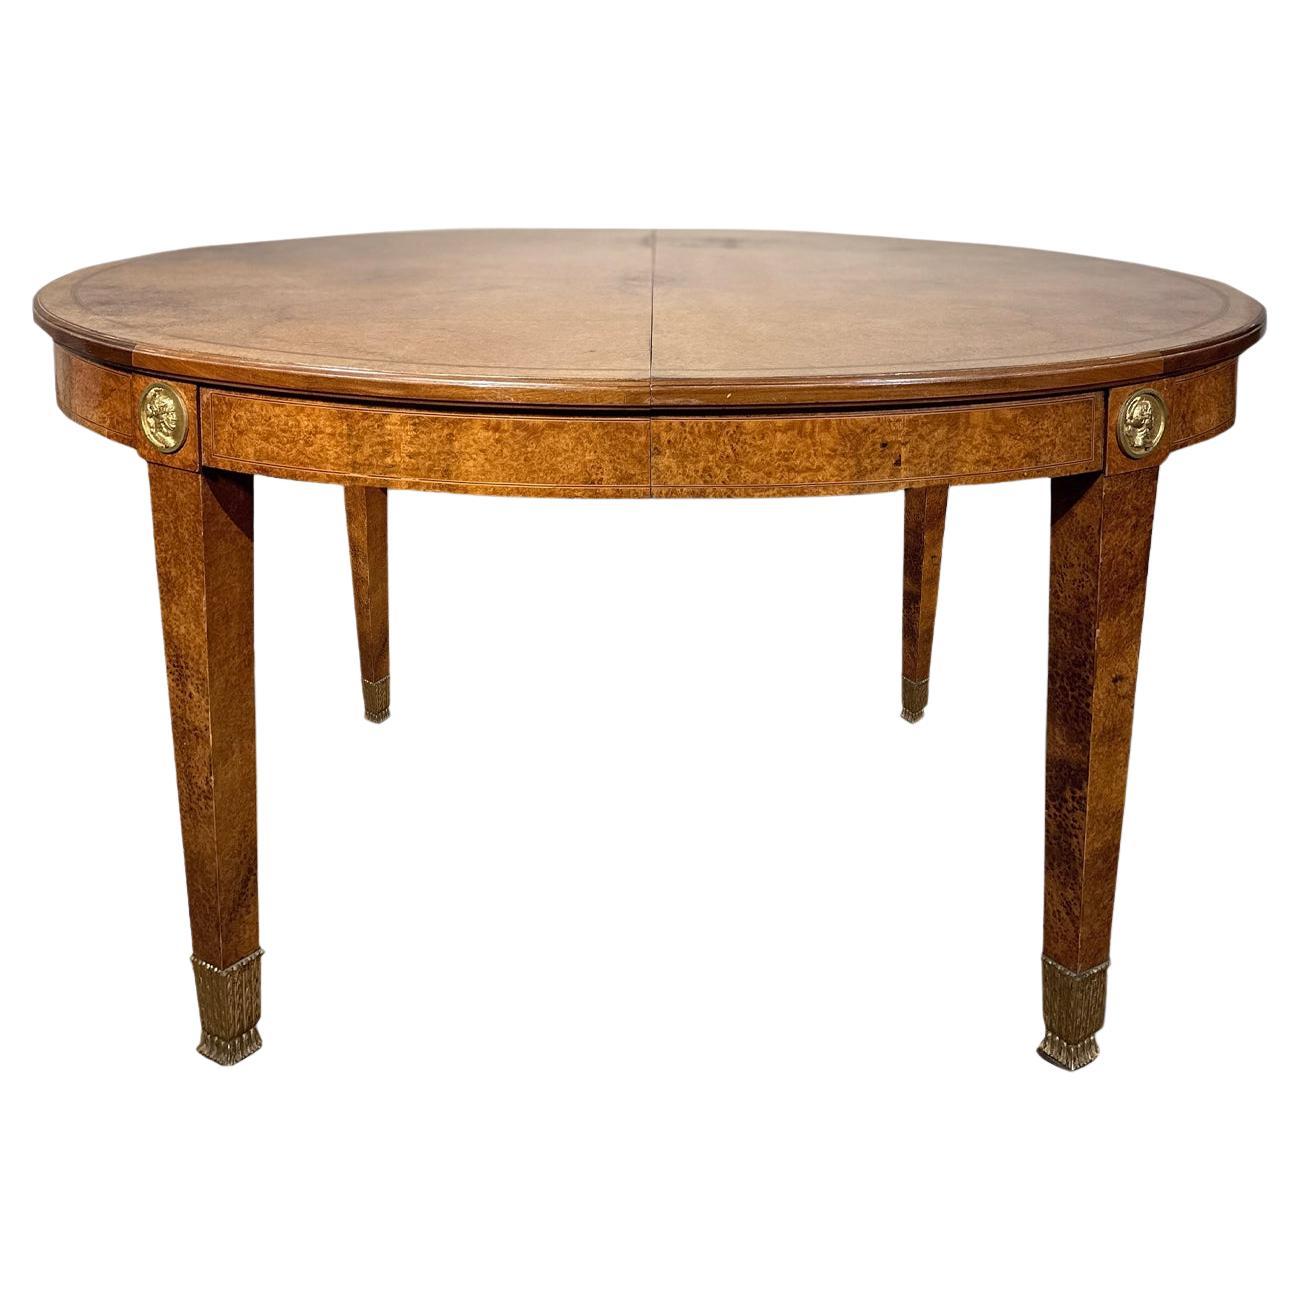 END OF THE 19th CENTURY OVAL TABLE IN MAPLE  For Sale